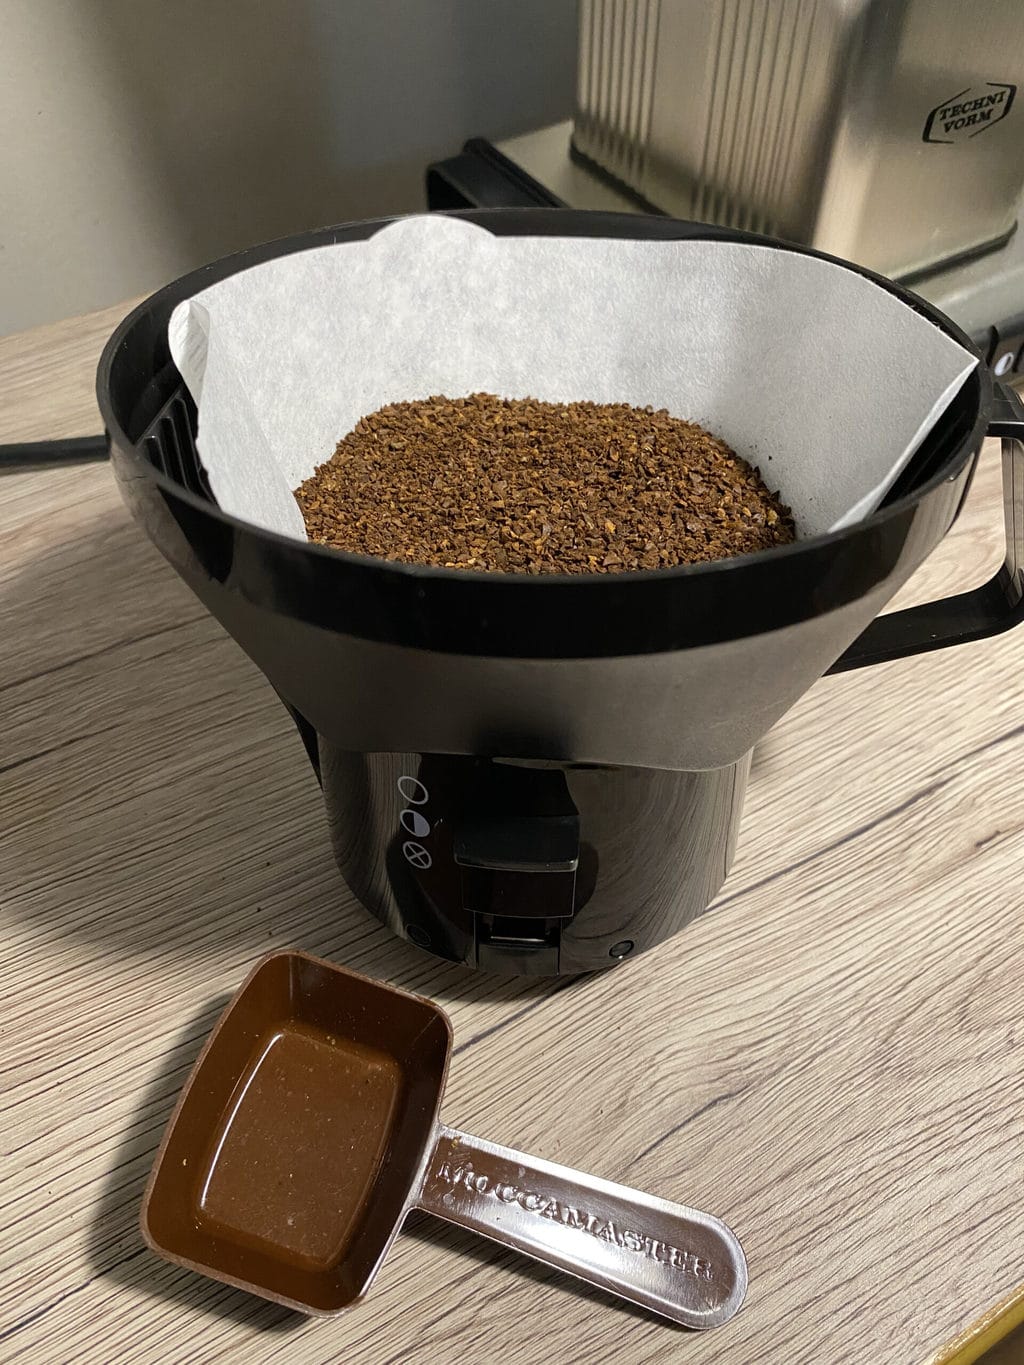 moccamaster cone shaped filter basket and scoop